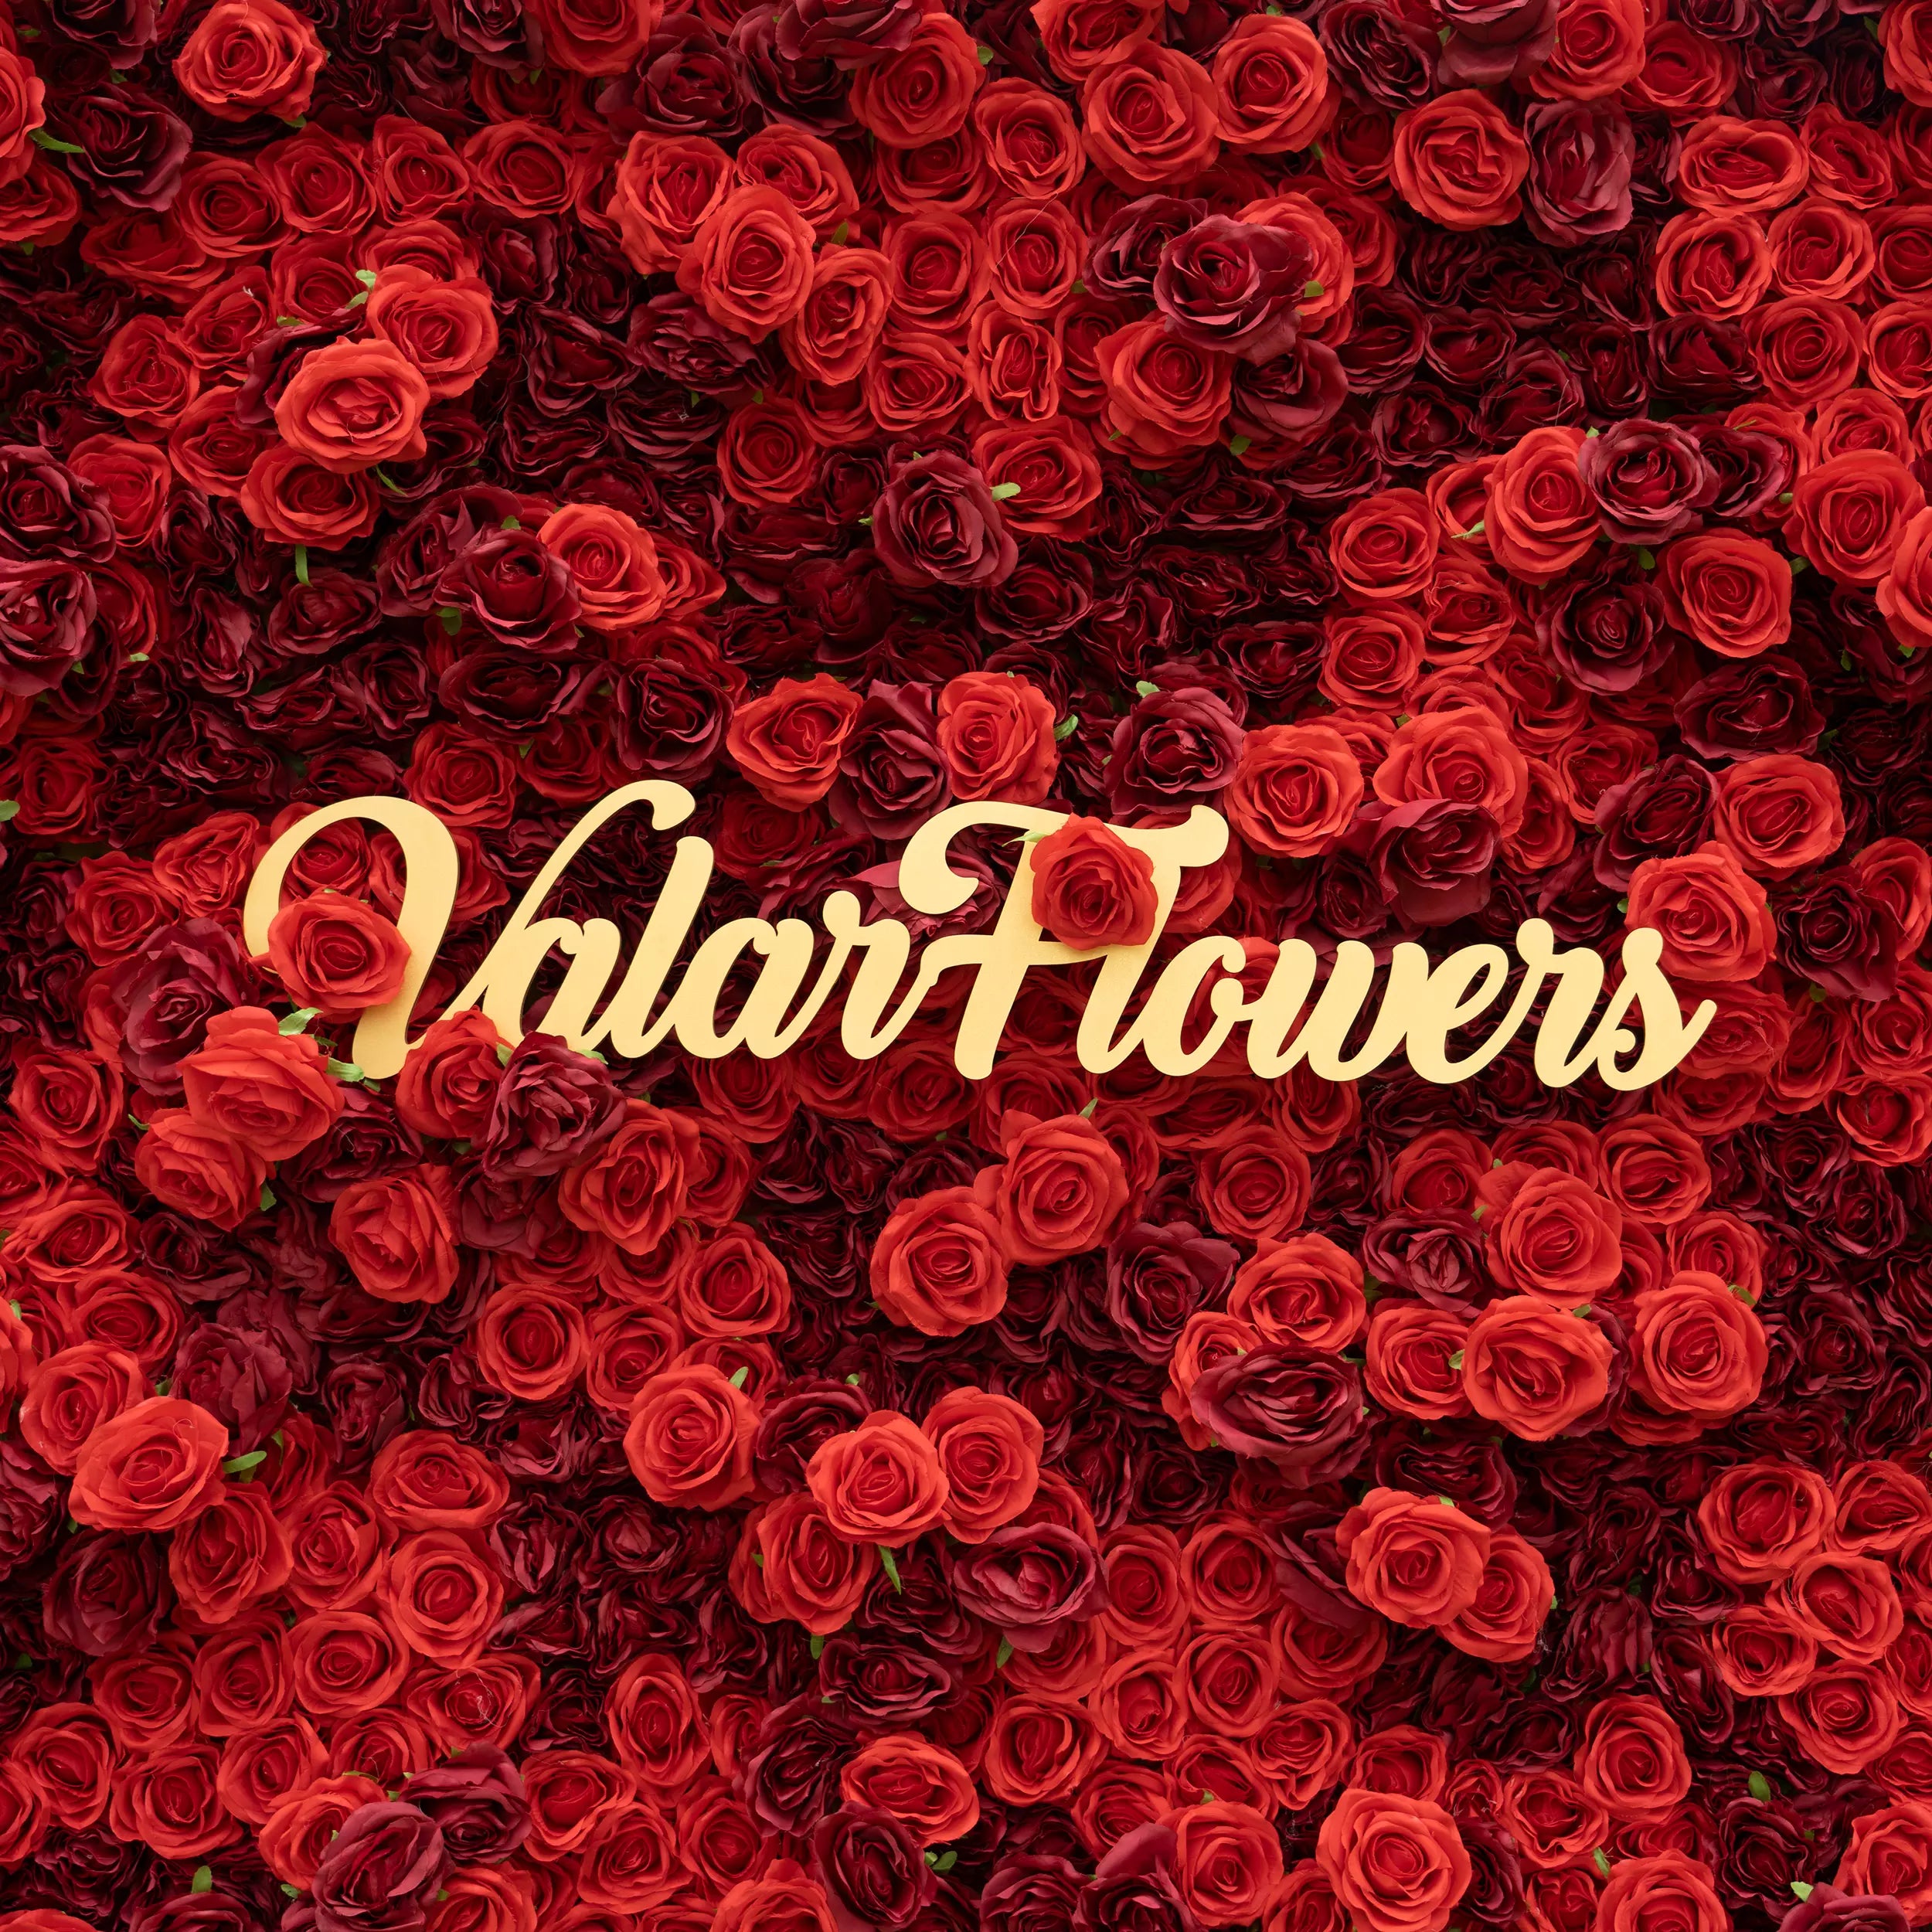 Valar Flower Roll Up Fabric Artificial Flower Wall Crimson Coronation: A Regal Array of Red Roses Radiating Romance and Reverence